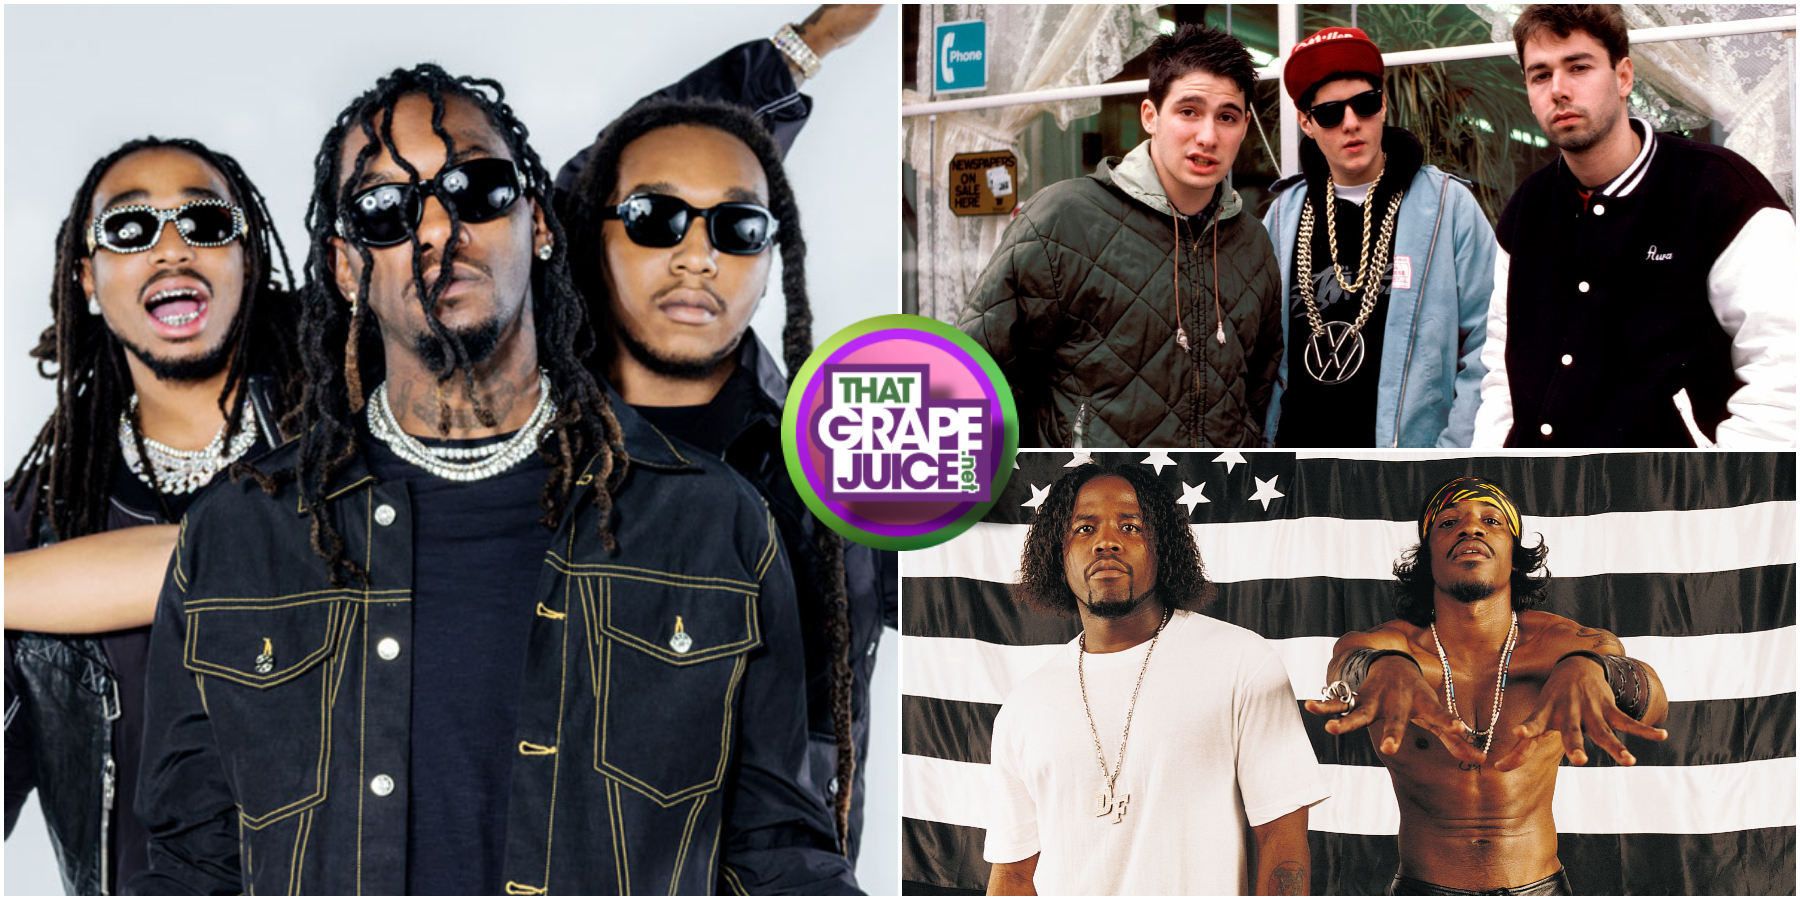 RIAA: Migos Blast Past Beastie Boys & OutKast To Become Most-Certified Rap Group in History